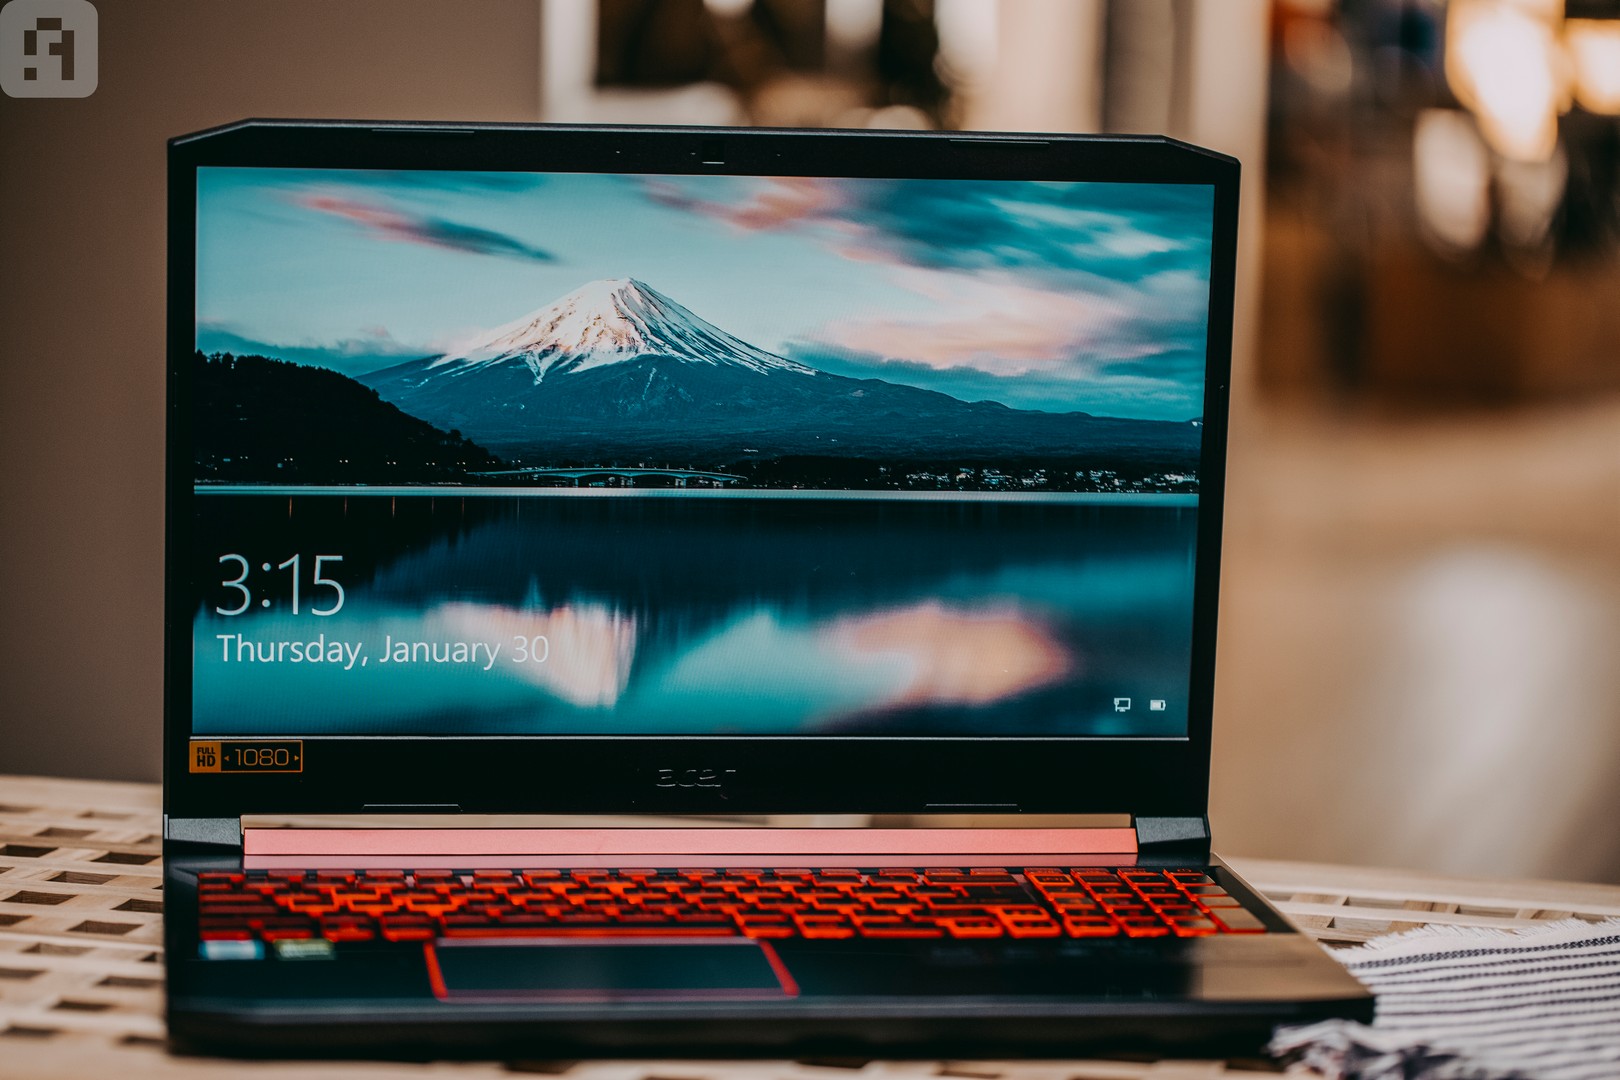 Acer Nitro 5 - Screen overview